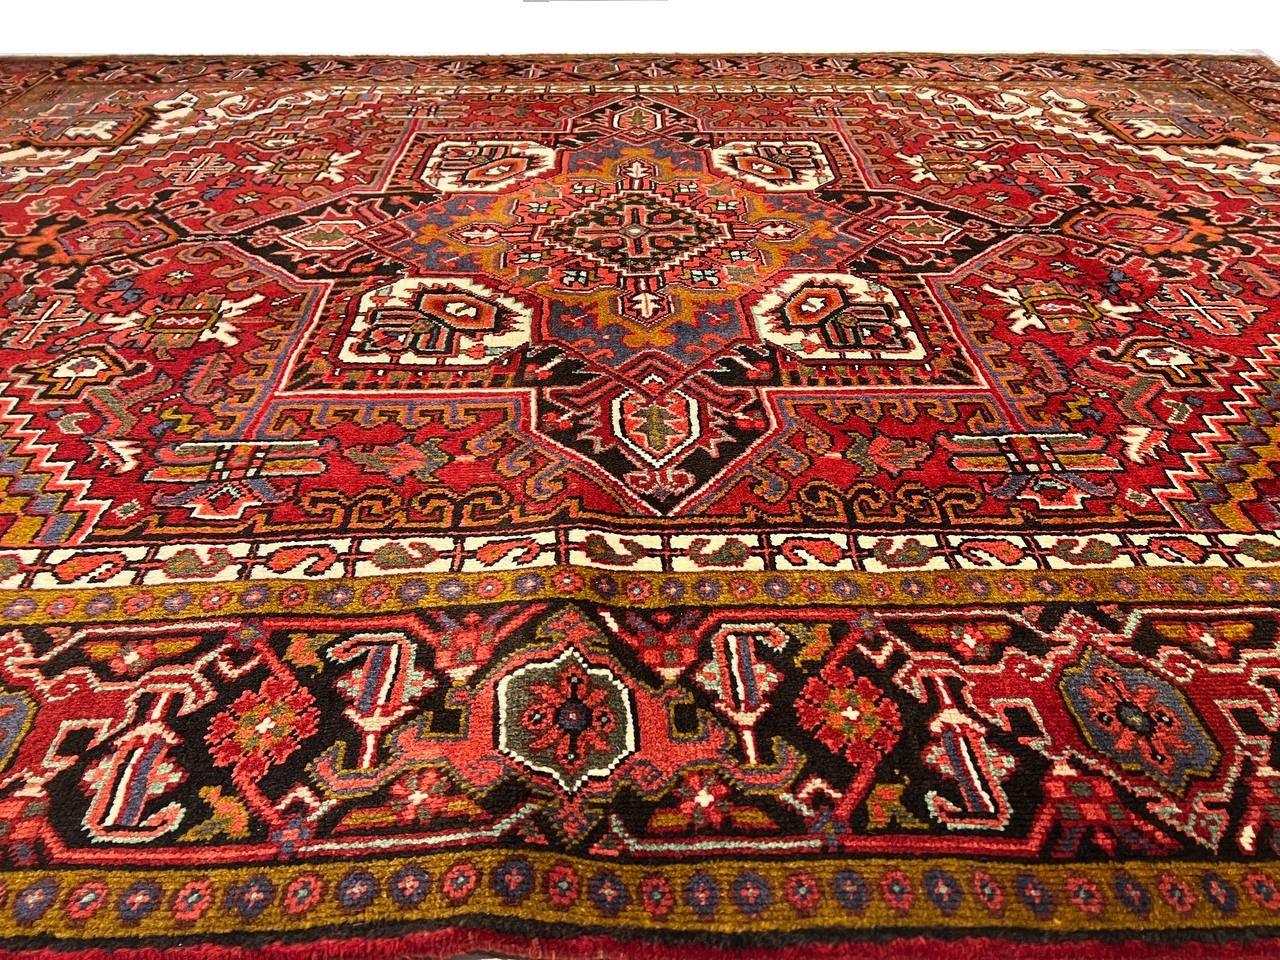 Canvello 1950s Persian Antique hand Knotted Heriz Rug - 7' X 9'4"